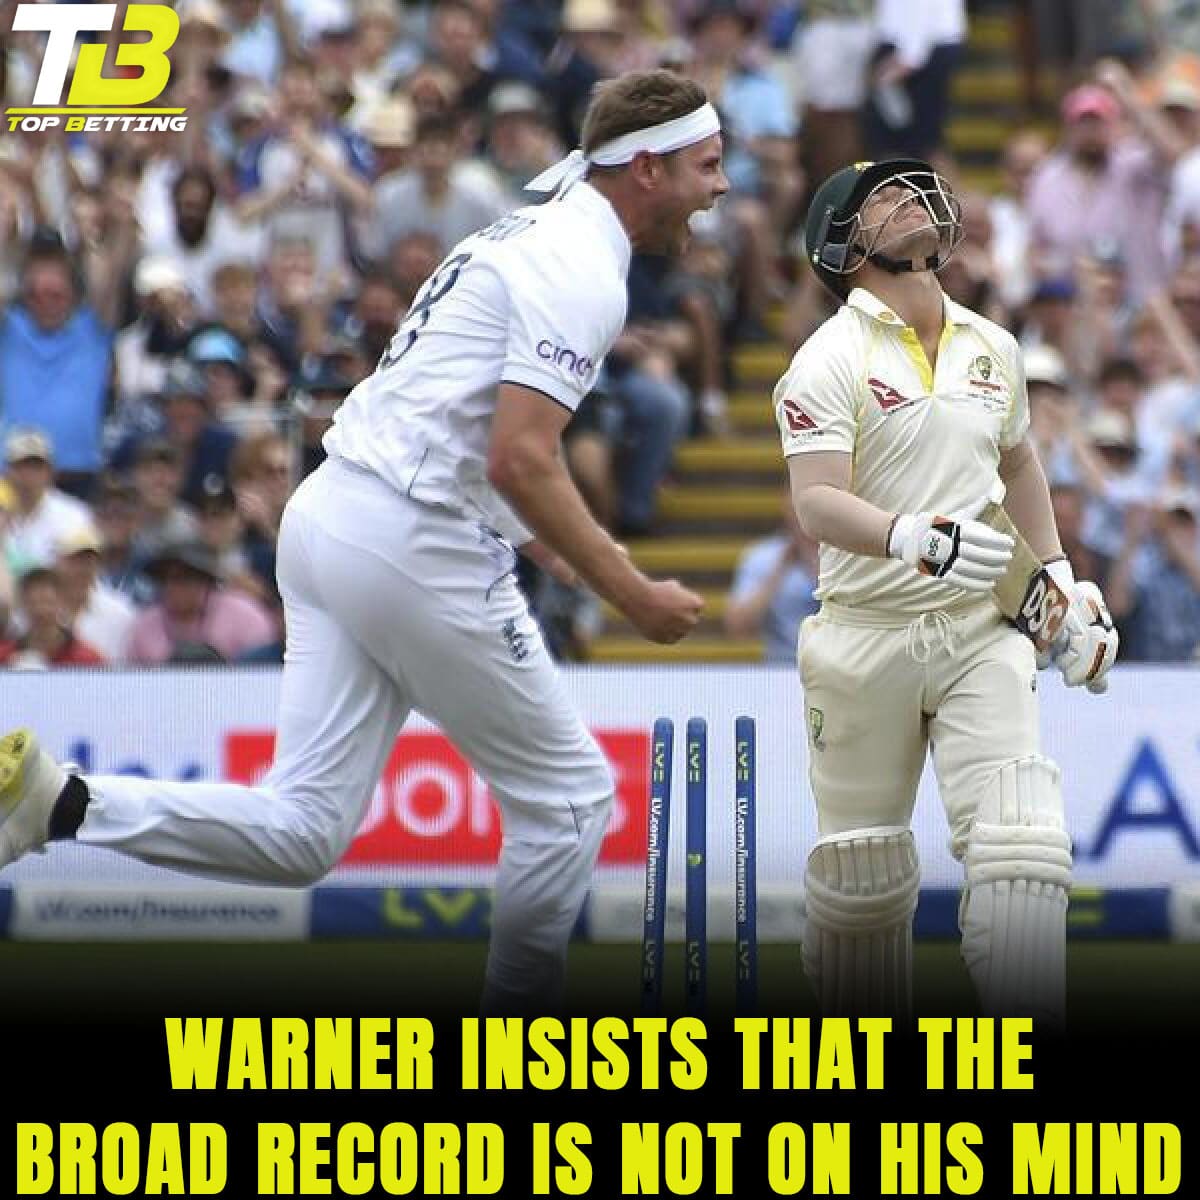 Warner insists that the Broad record is not on his mind